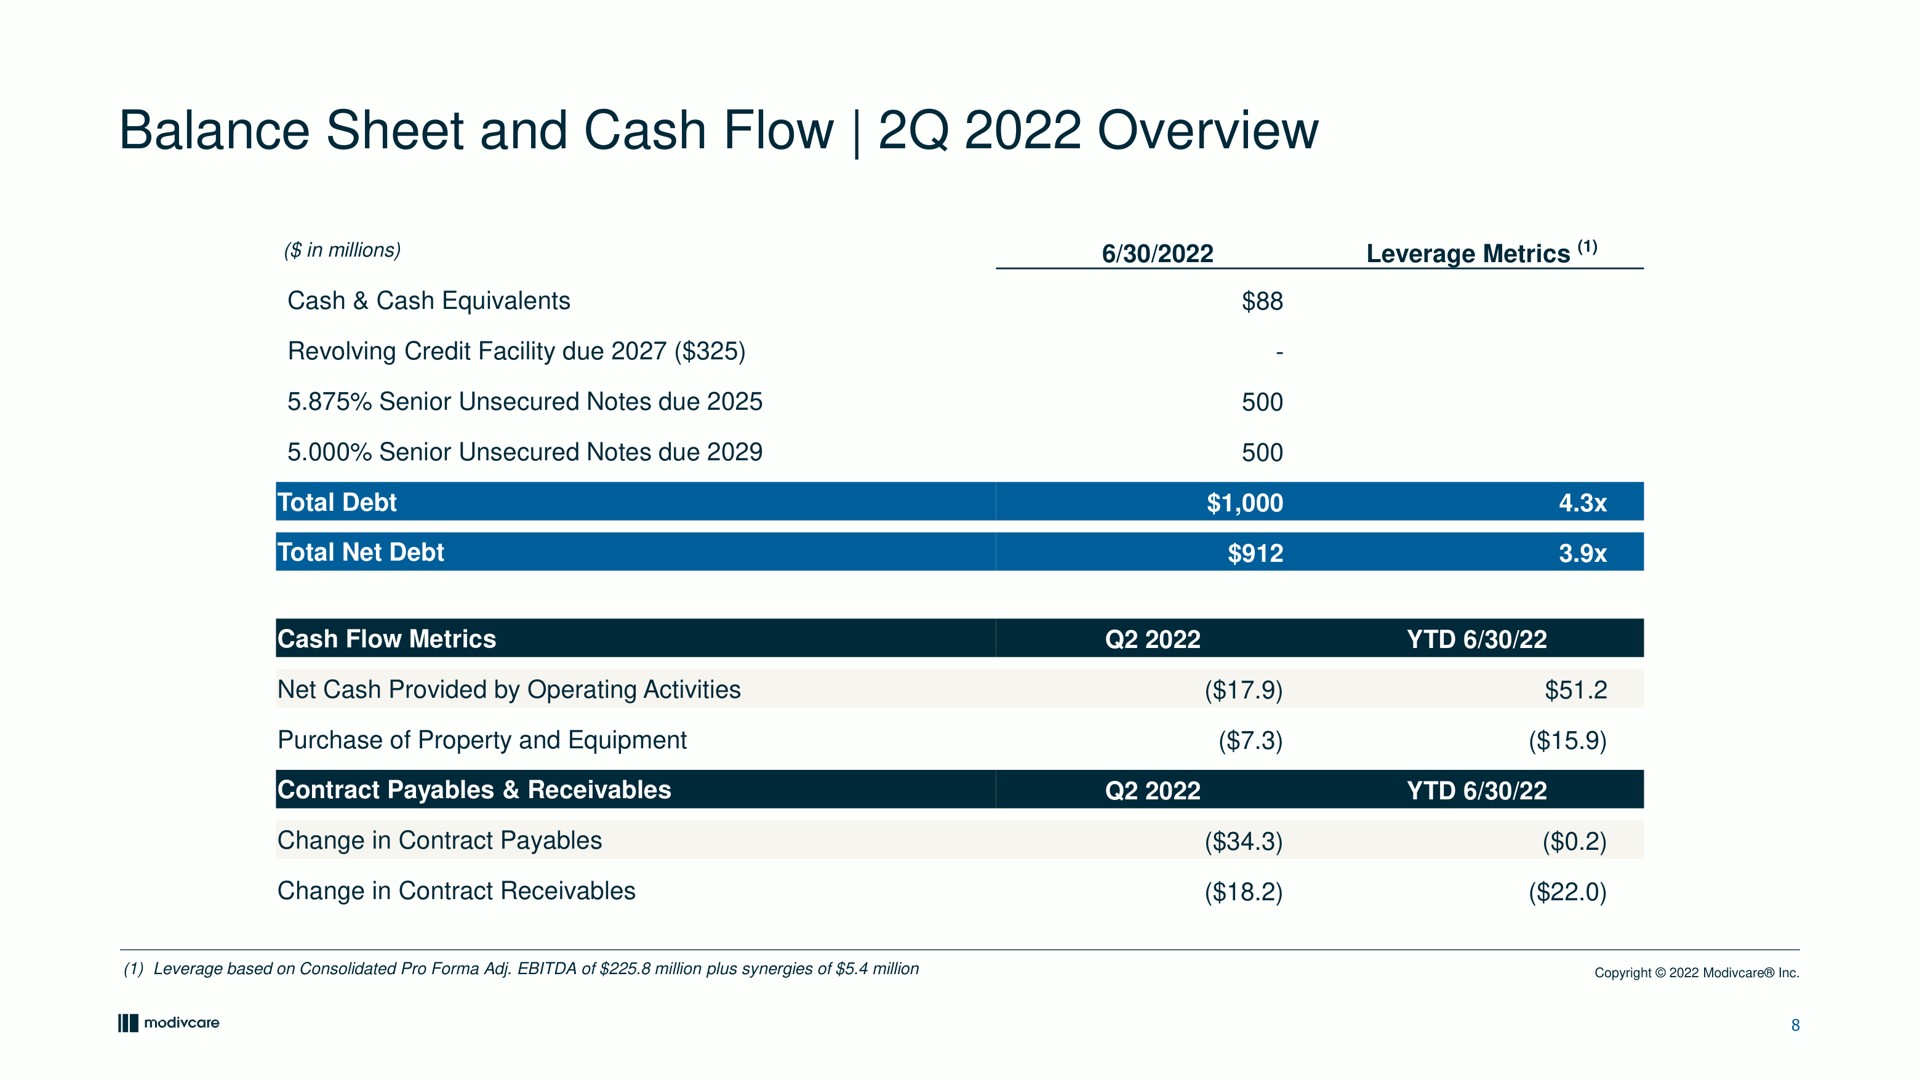 balance sheet and cash flow overview in millions leverage metrics | ModivCare